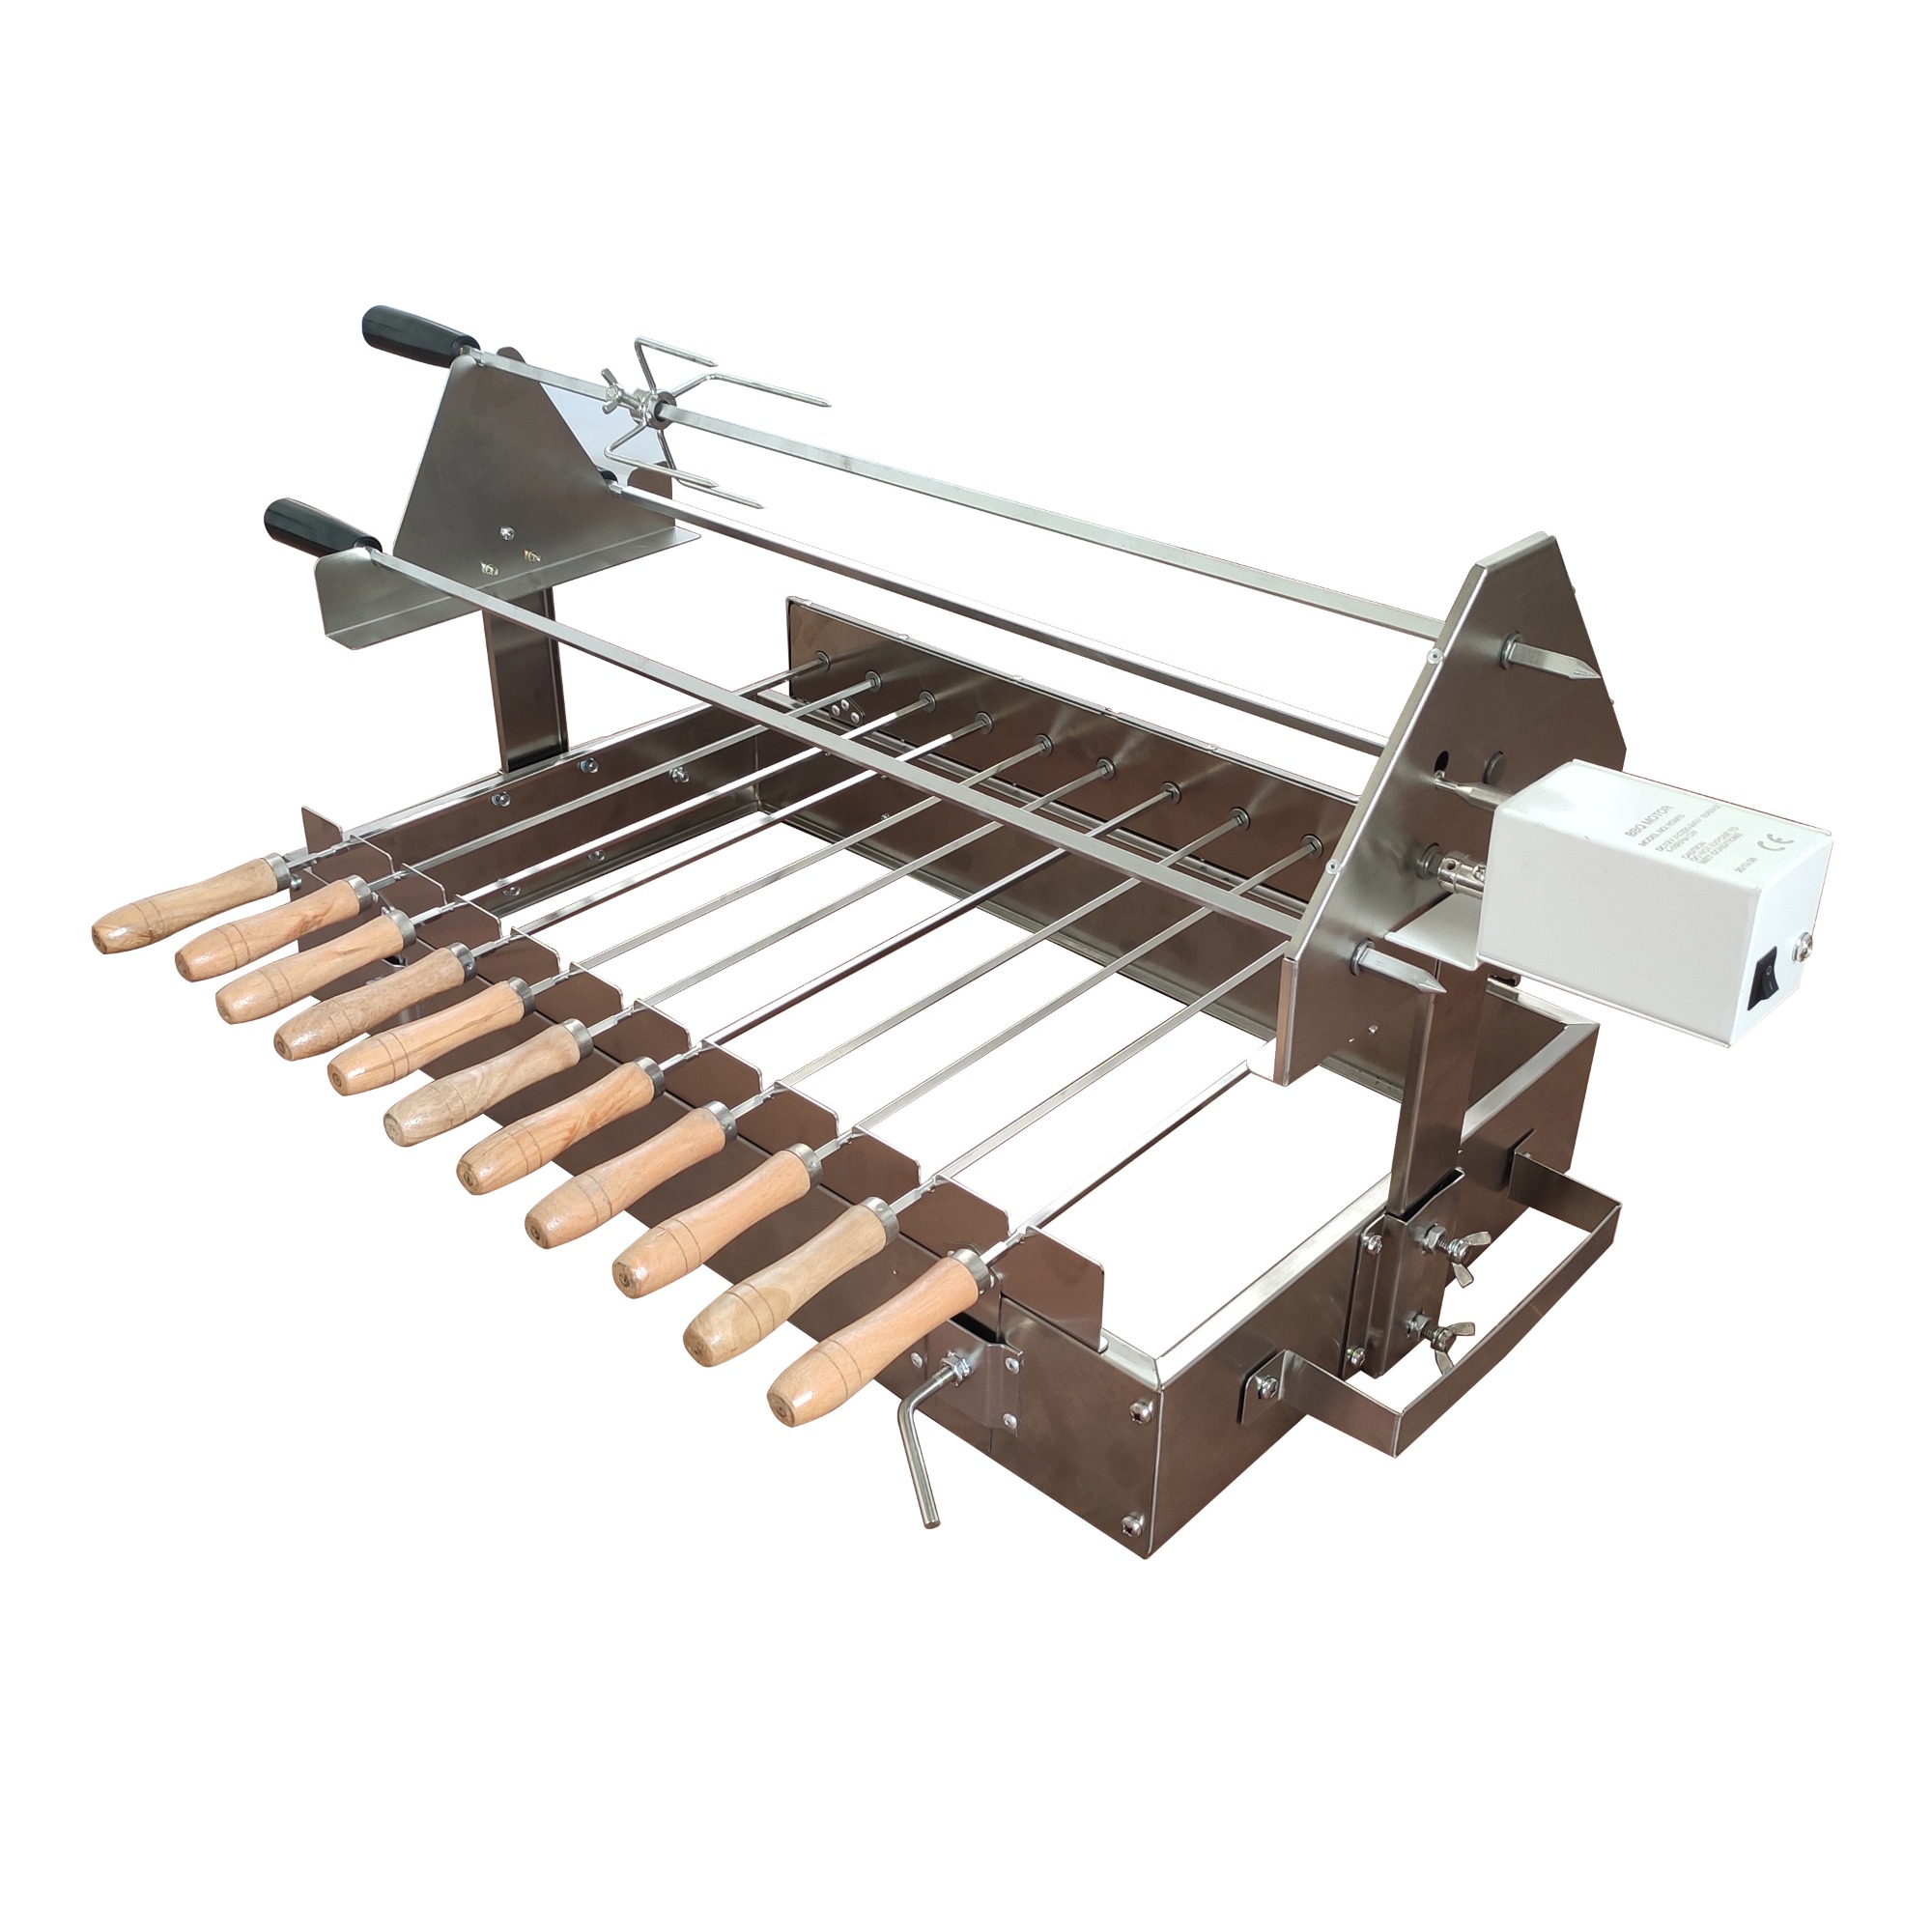 Bbq chypriote grill top rotisserie kebab brochettes-small-ex dispay prototype 